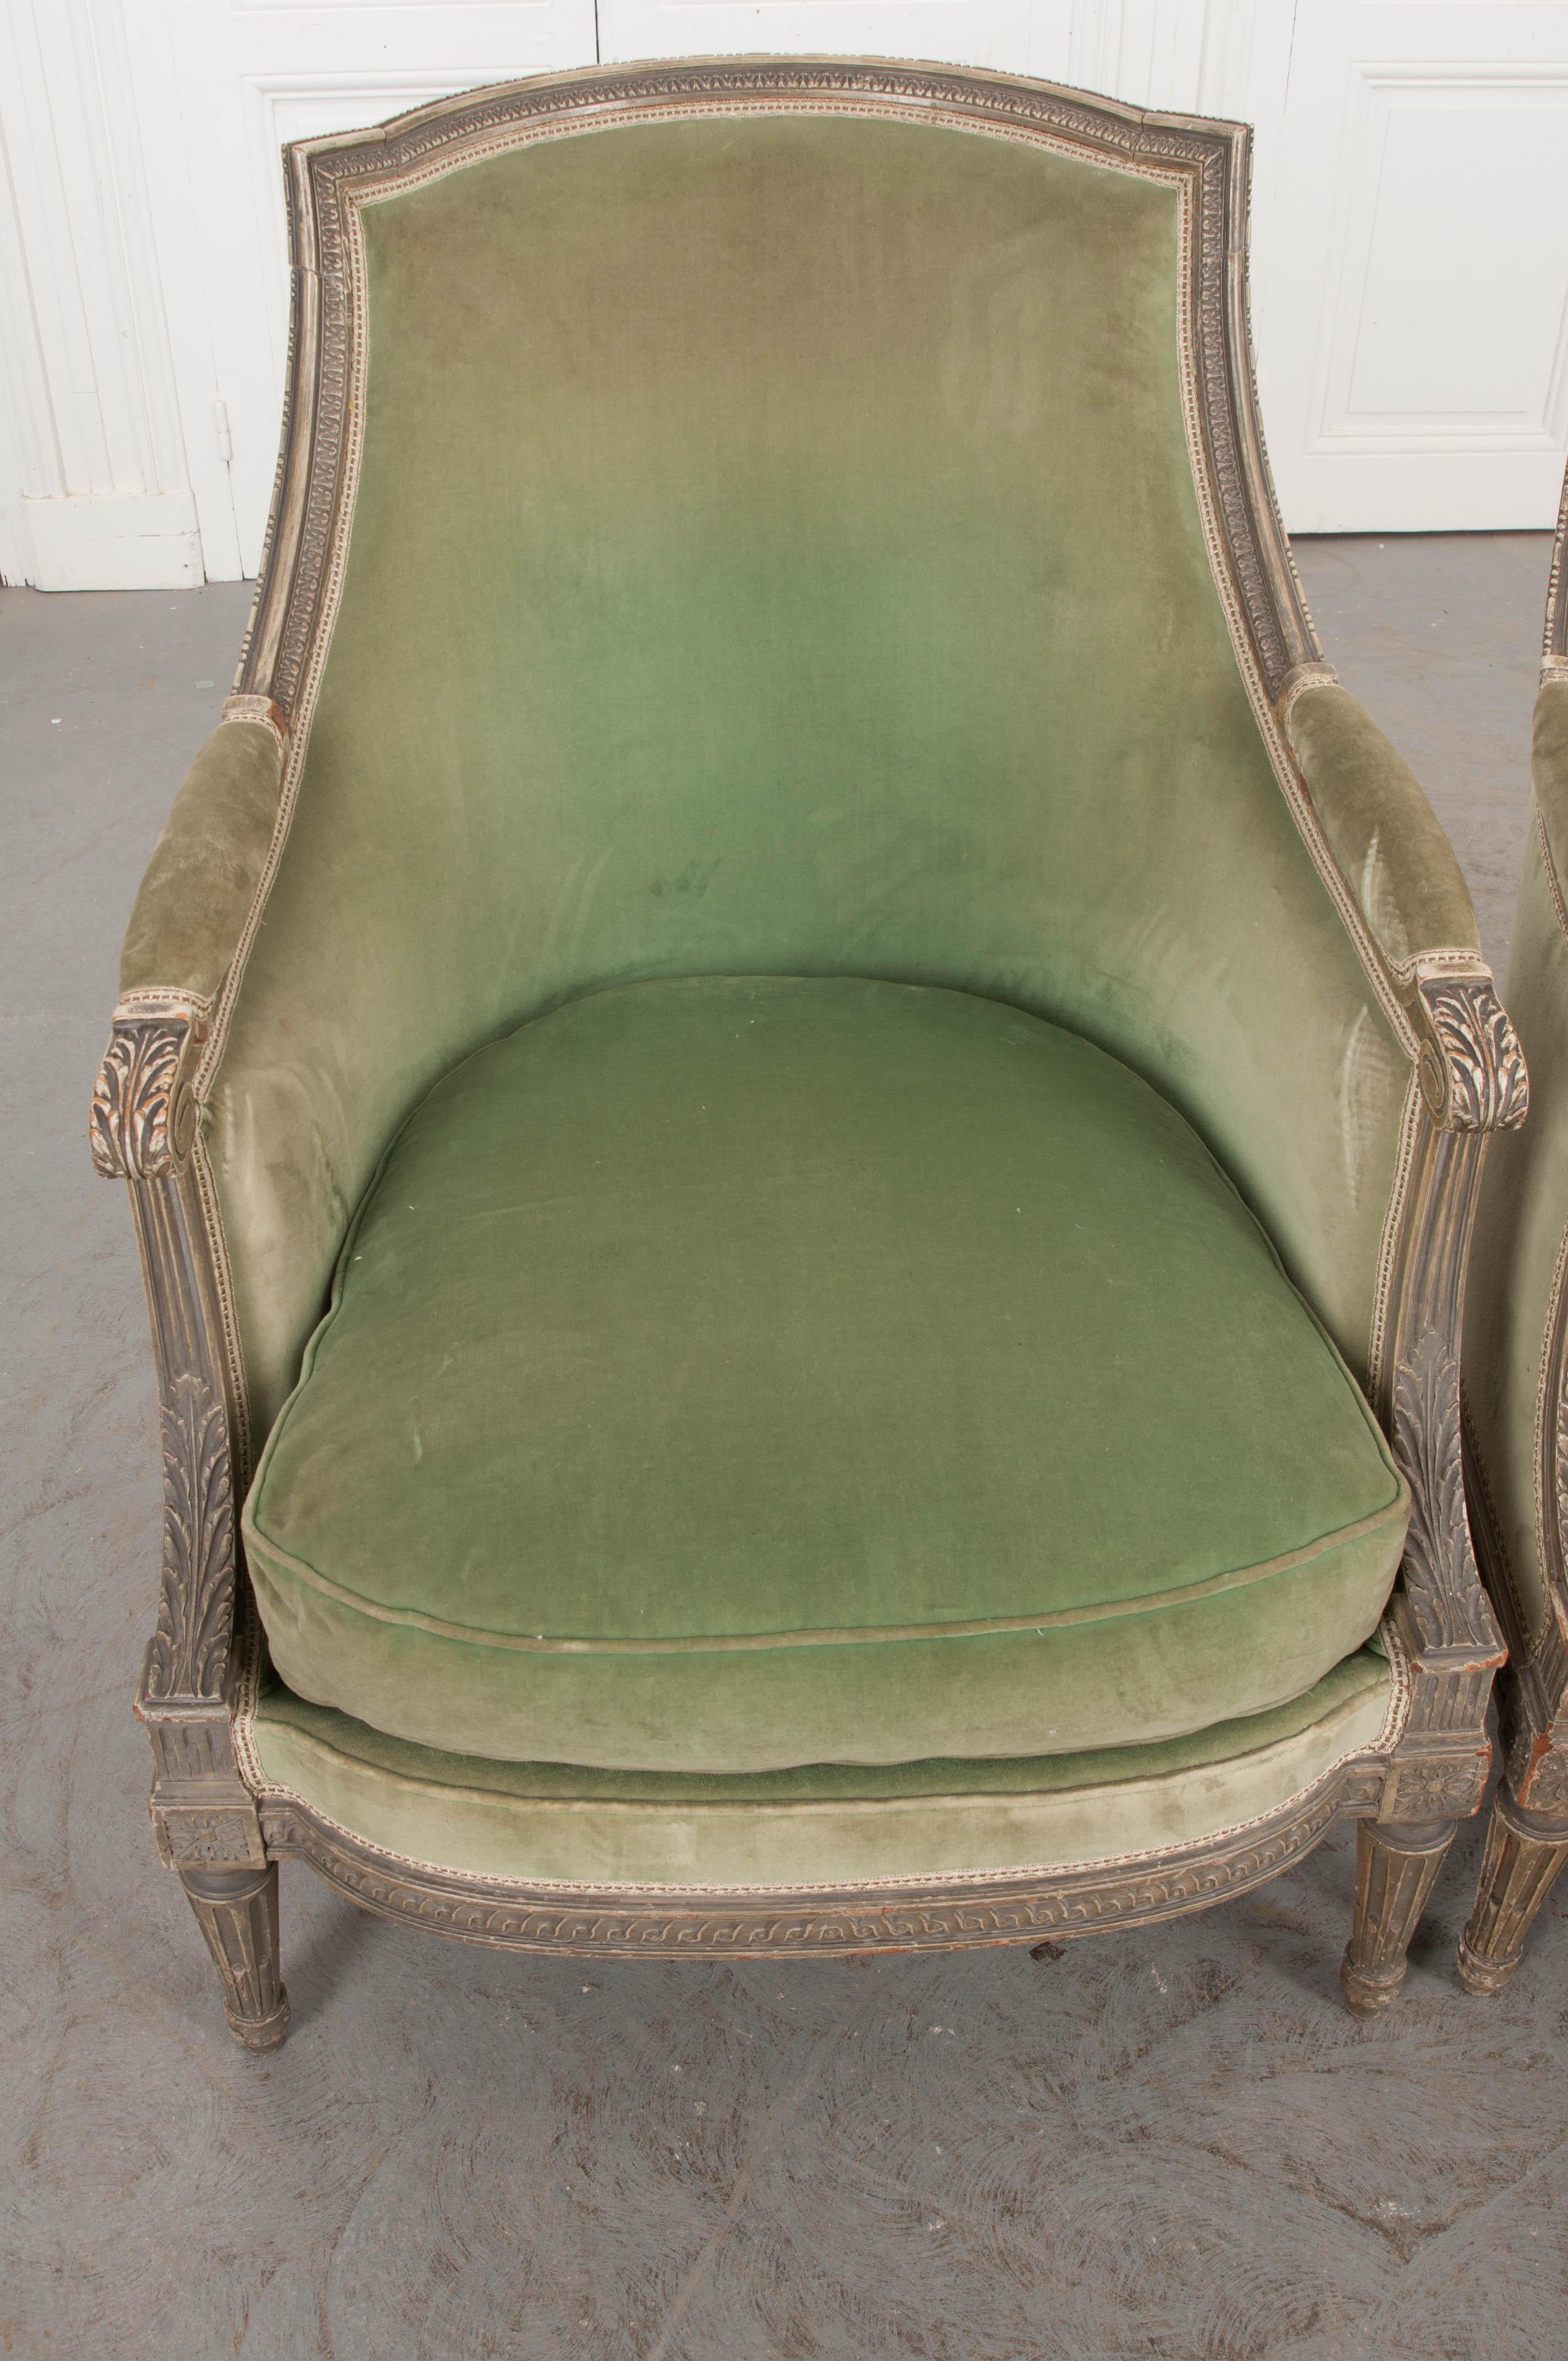 This stately pair of Louis XVI-style bergères are from 1870s France. Of generous proportion, the delicately carved wood displays its original cream paint. These elegant chairs have been upholstered in a lovely spring-green velvet and are sure to